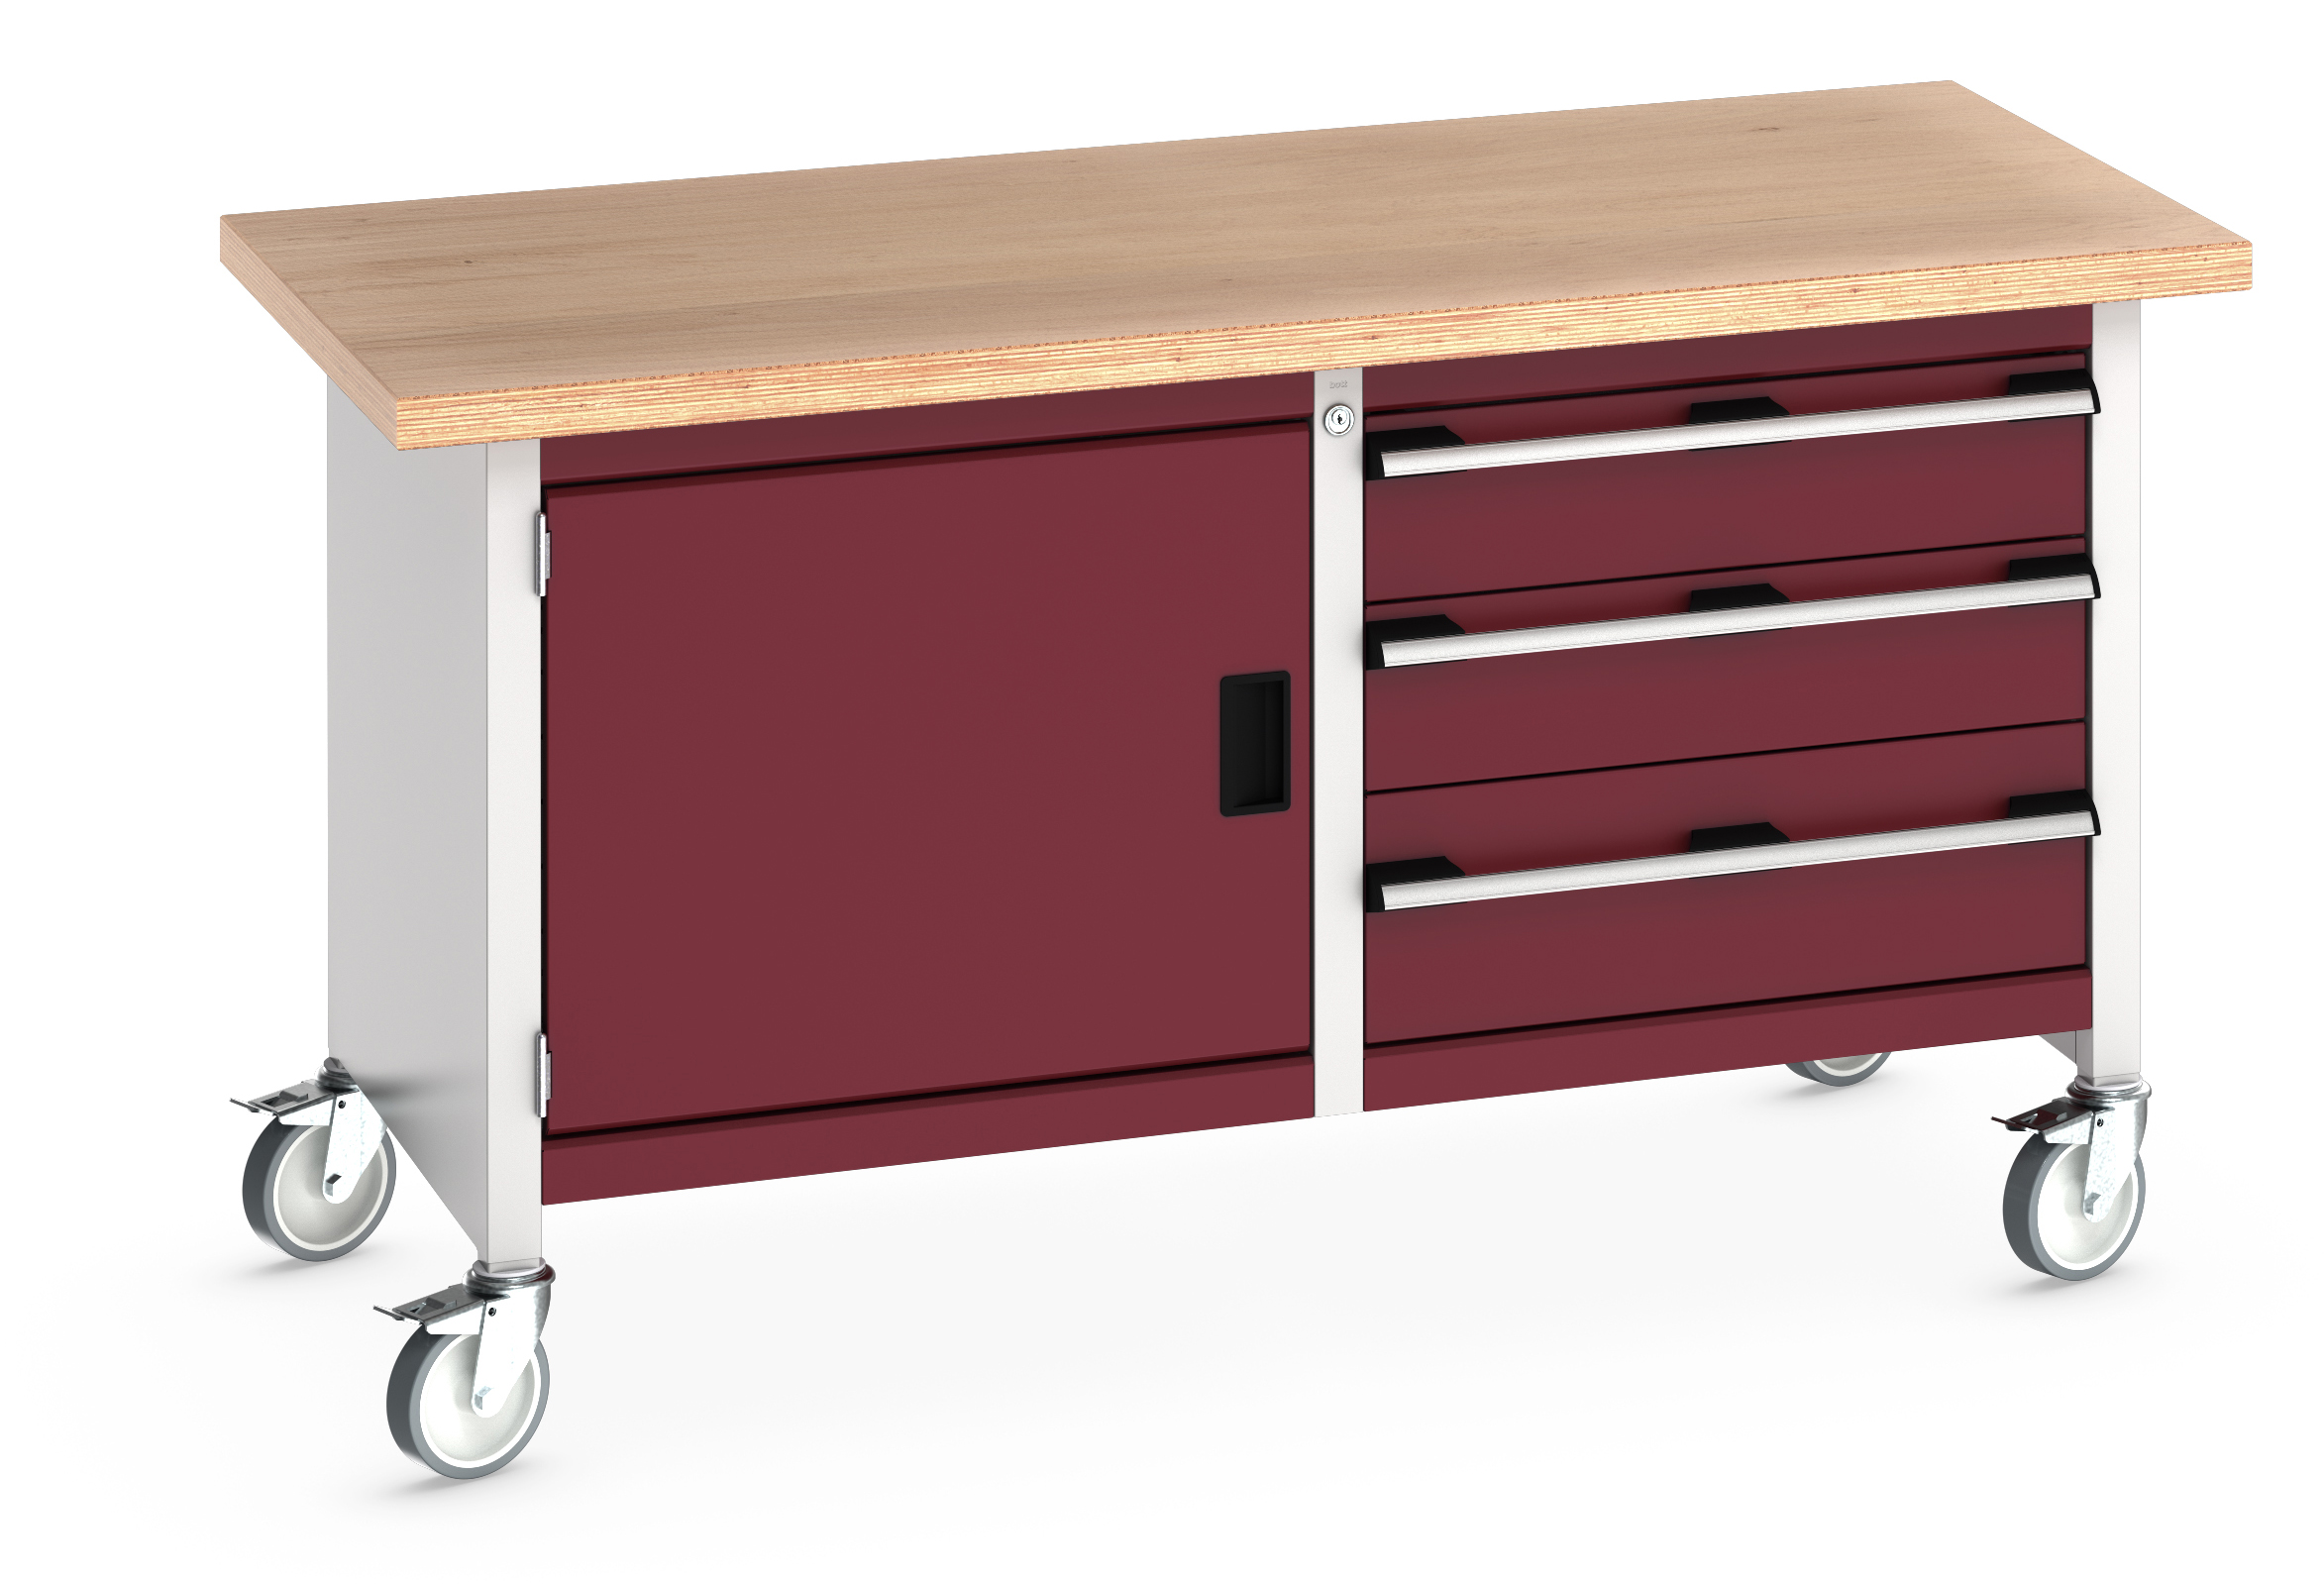 Bott Cubio Mobile Storage Bench With Full Cupboard / 3 Drawer Cabinet - 41002100.24V